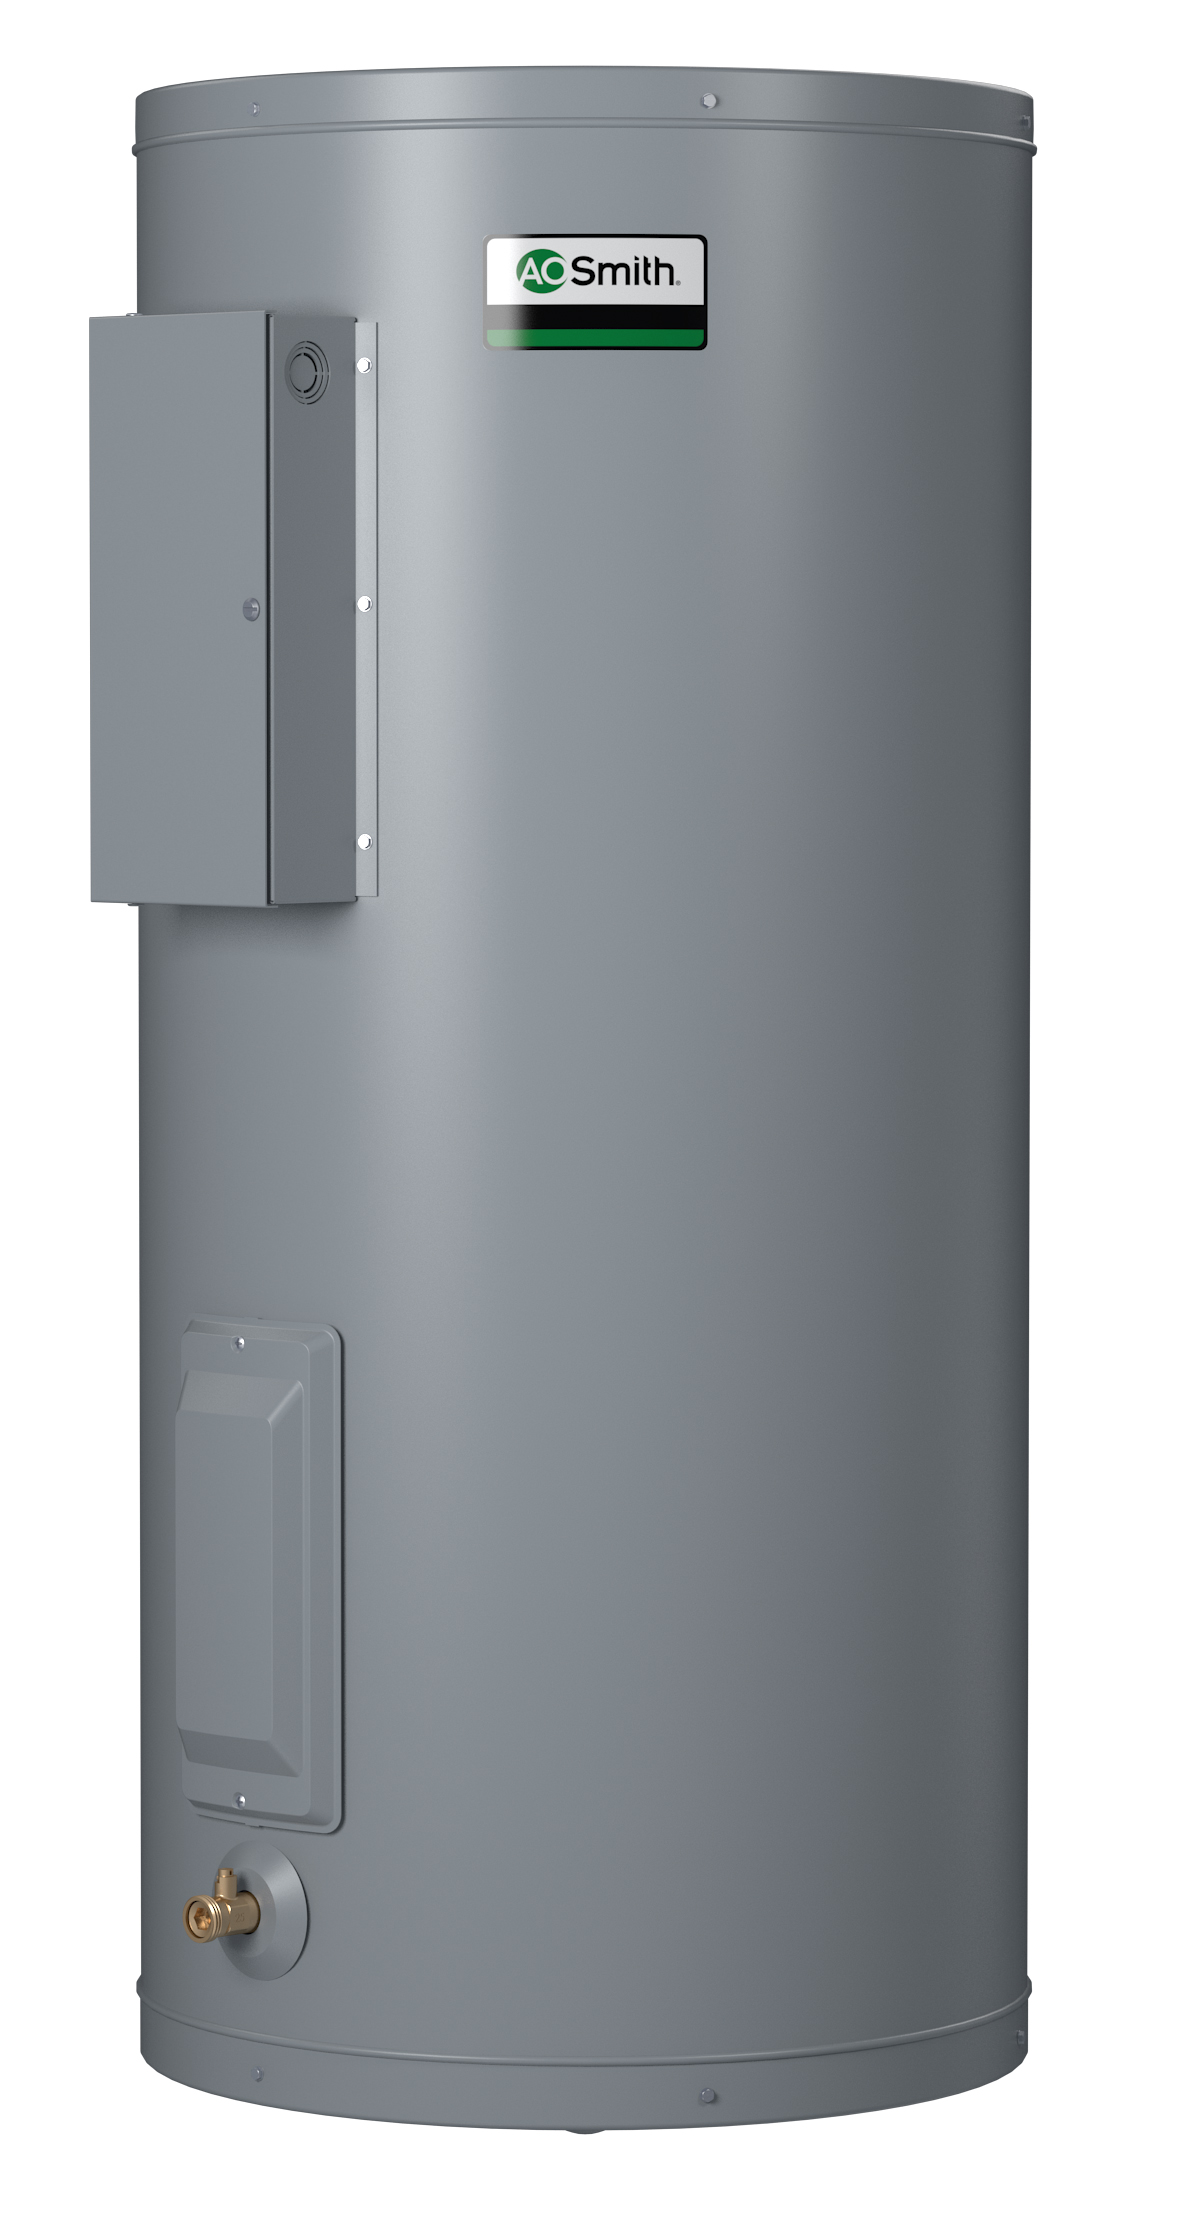 AO SMITH DEN-120D: 120 GALLONS, 10.0KW, 480 VOLT, 1 PHASE, (2-5000 WATT ELEMENTS, SIMULTANEOUS WIRING), DURA-POWER, LIGHT DUTY COMMERCIAL ELECTRIC WATER HEATER